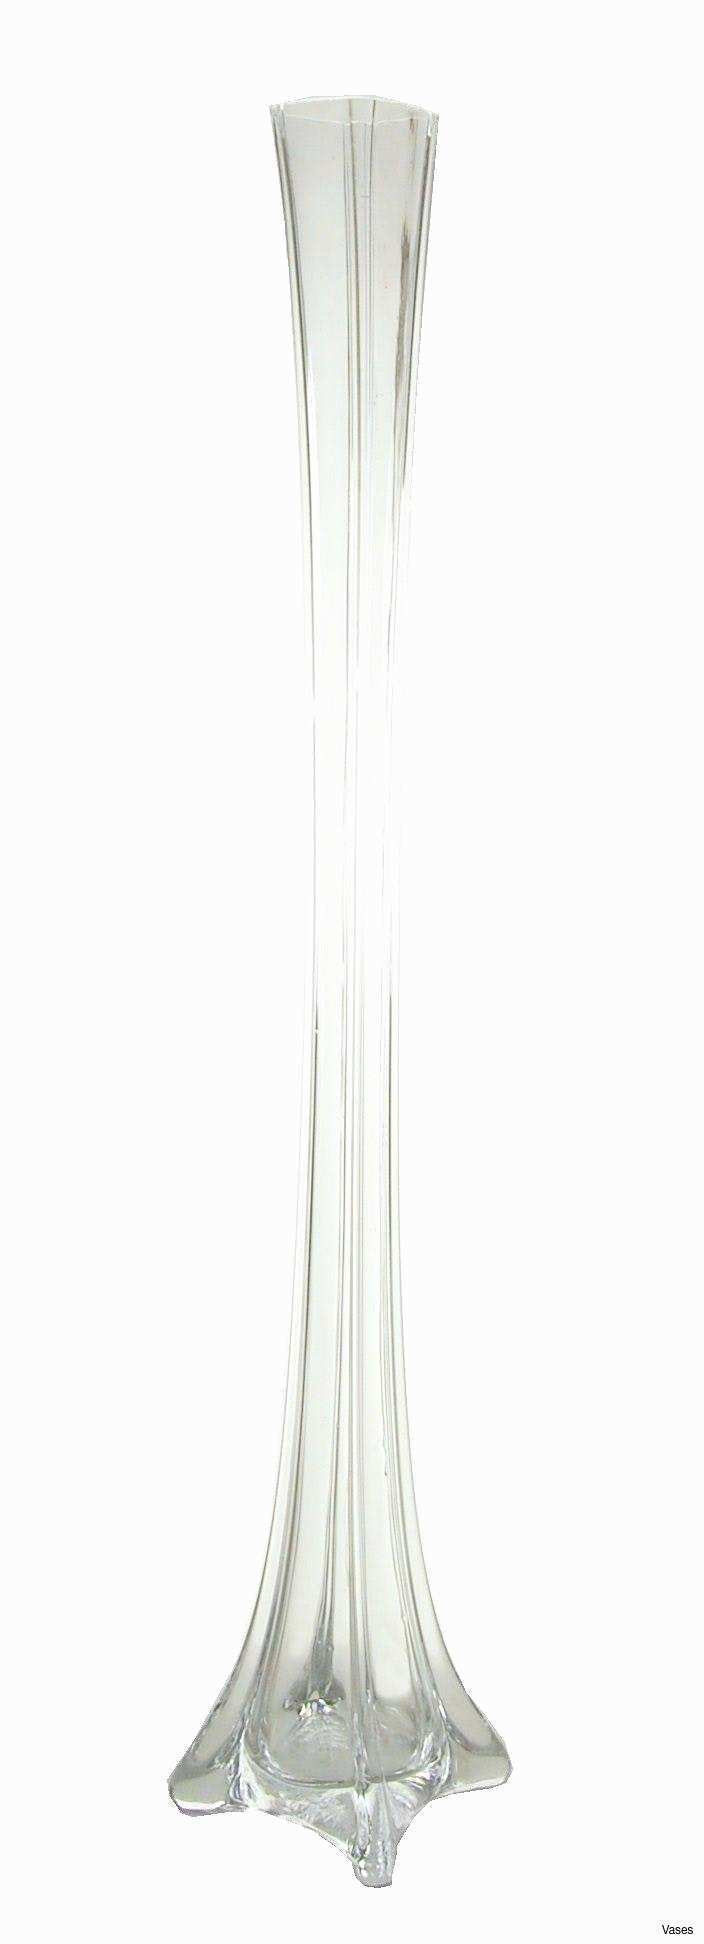 15 Lovable 20 Inch Eiffel tower Vases 2024 free download 20 inch eiffel tower vases of feather wedding centerpieces luxury living room centerpiece vases regarding bf3d43d9ef97e5cf20e3137 feather wedding centerpieces lovely dihizz wp content white 